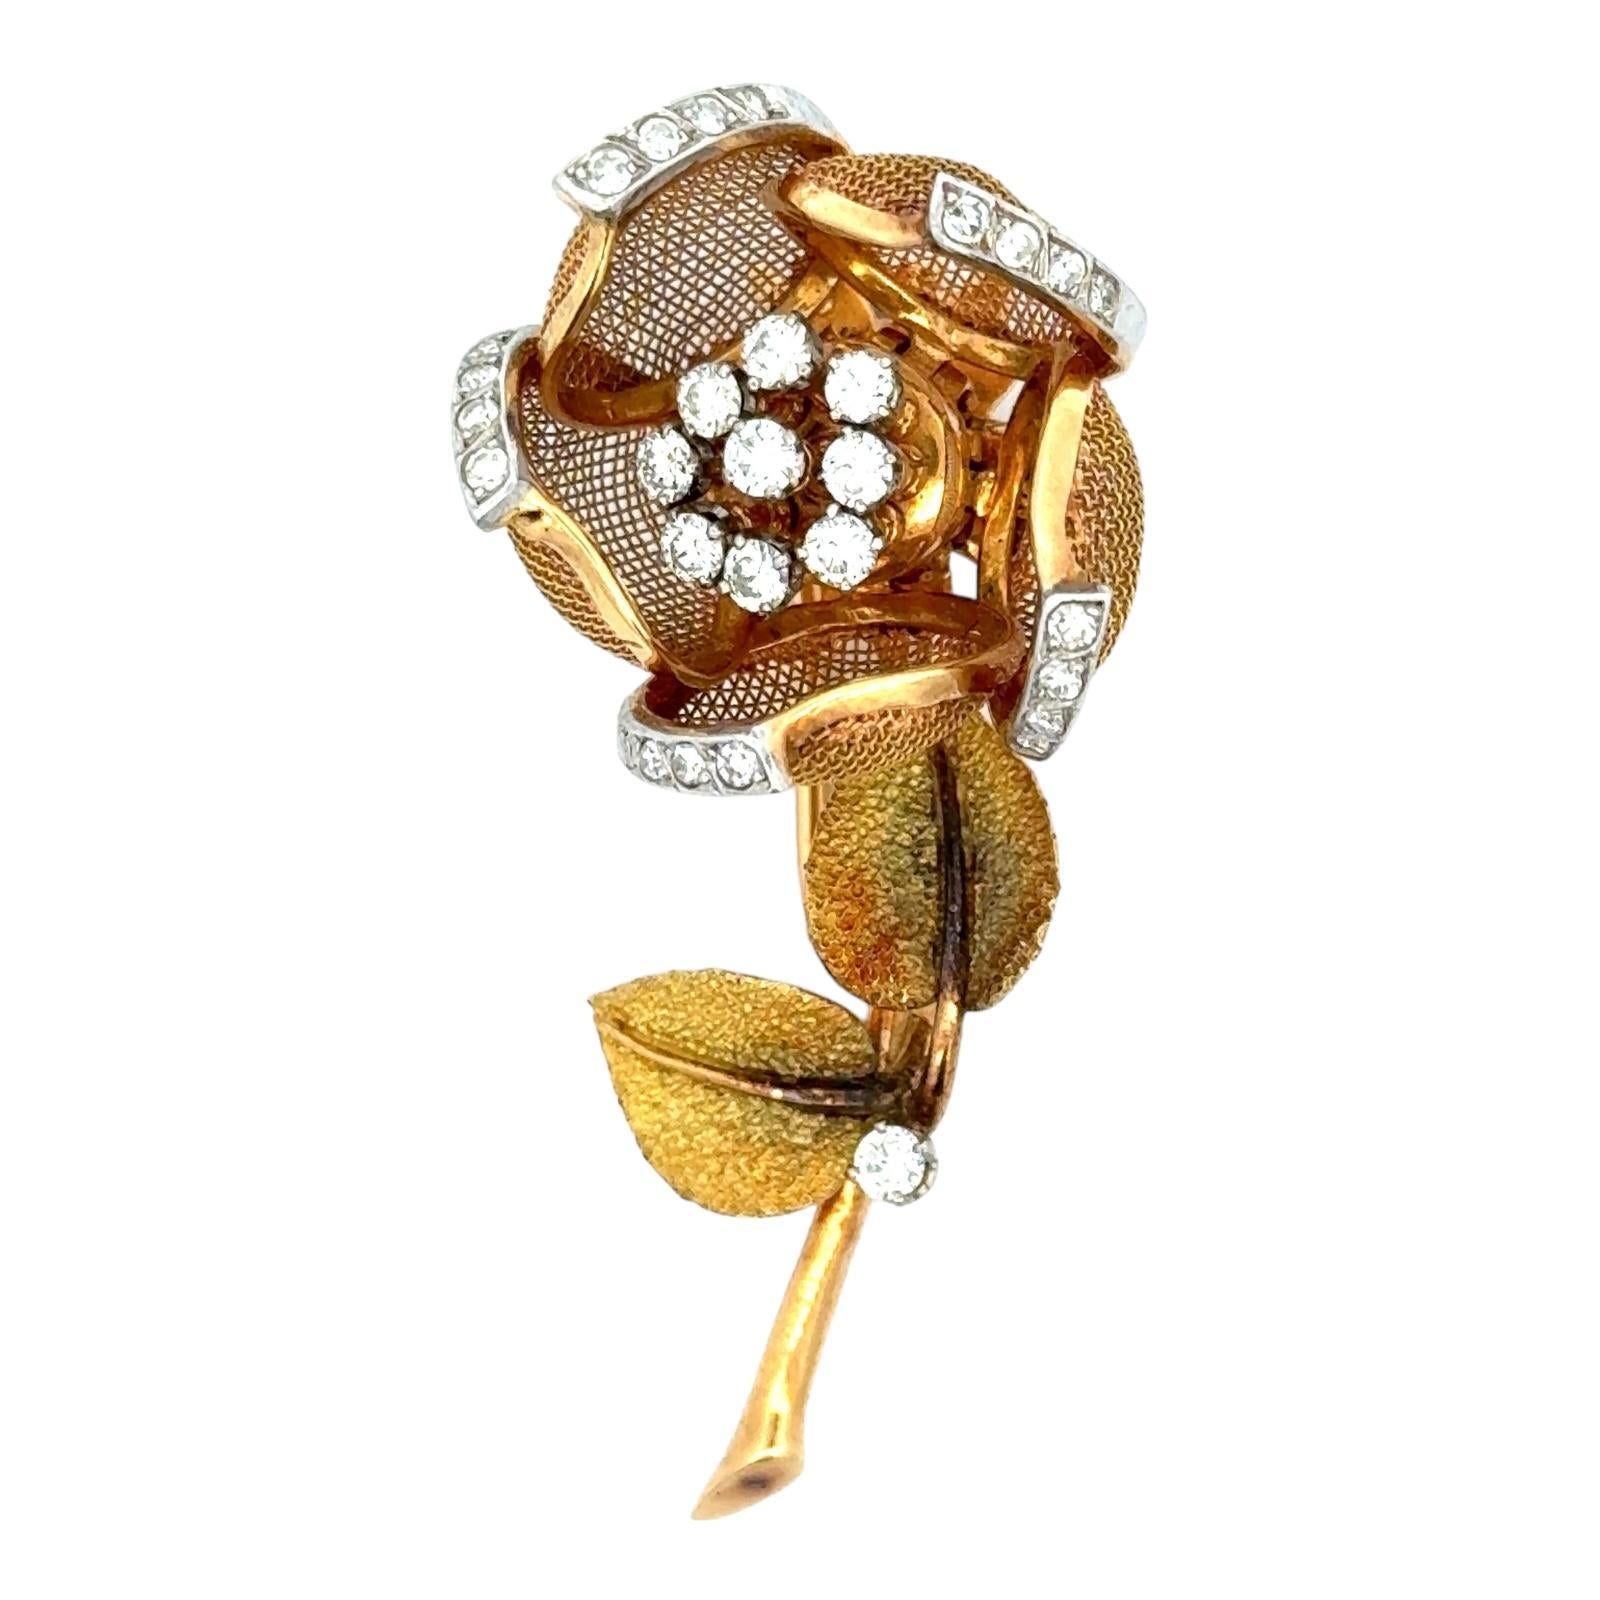 Beautiful French Tremblant floral brooch handcrafted in 18 karat yellow gold. The petals move and are set with round brilliant cut diamonds weighing approximately .85 carat total weight and graded F-G color and VS2-SI1 clarity. The pin measures 2.00